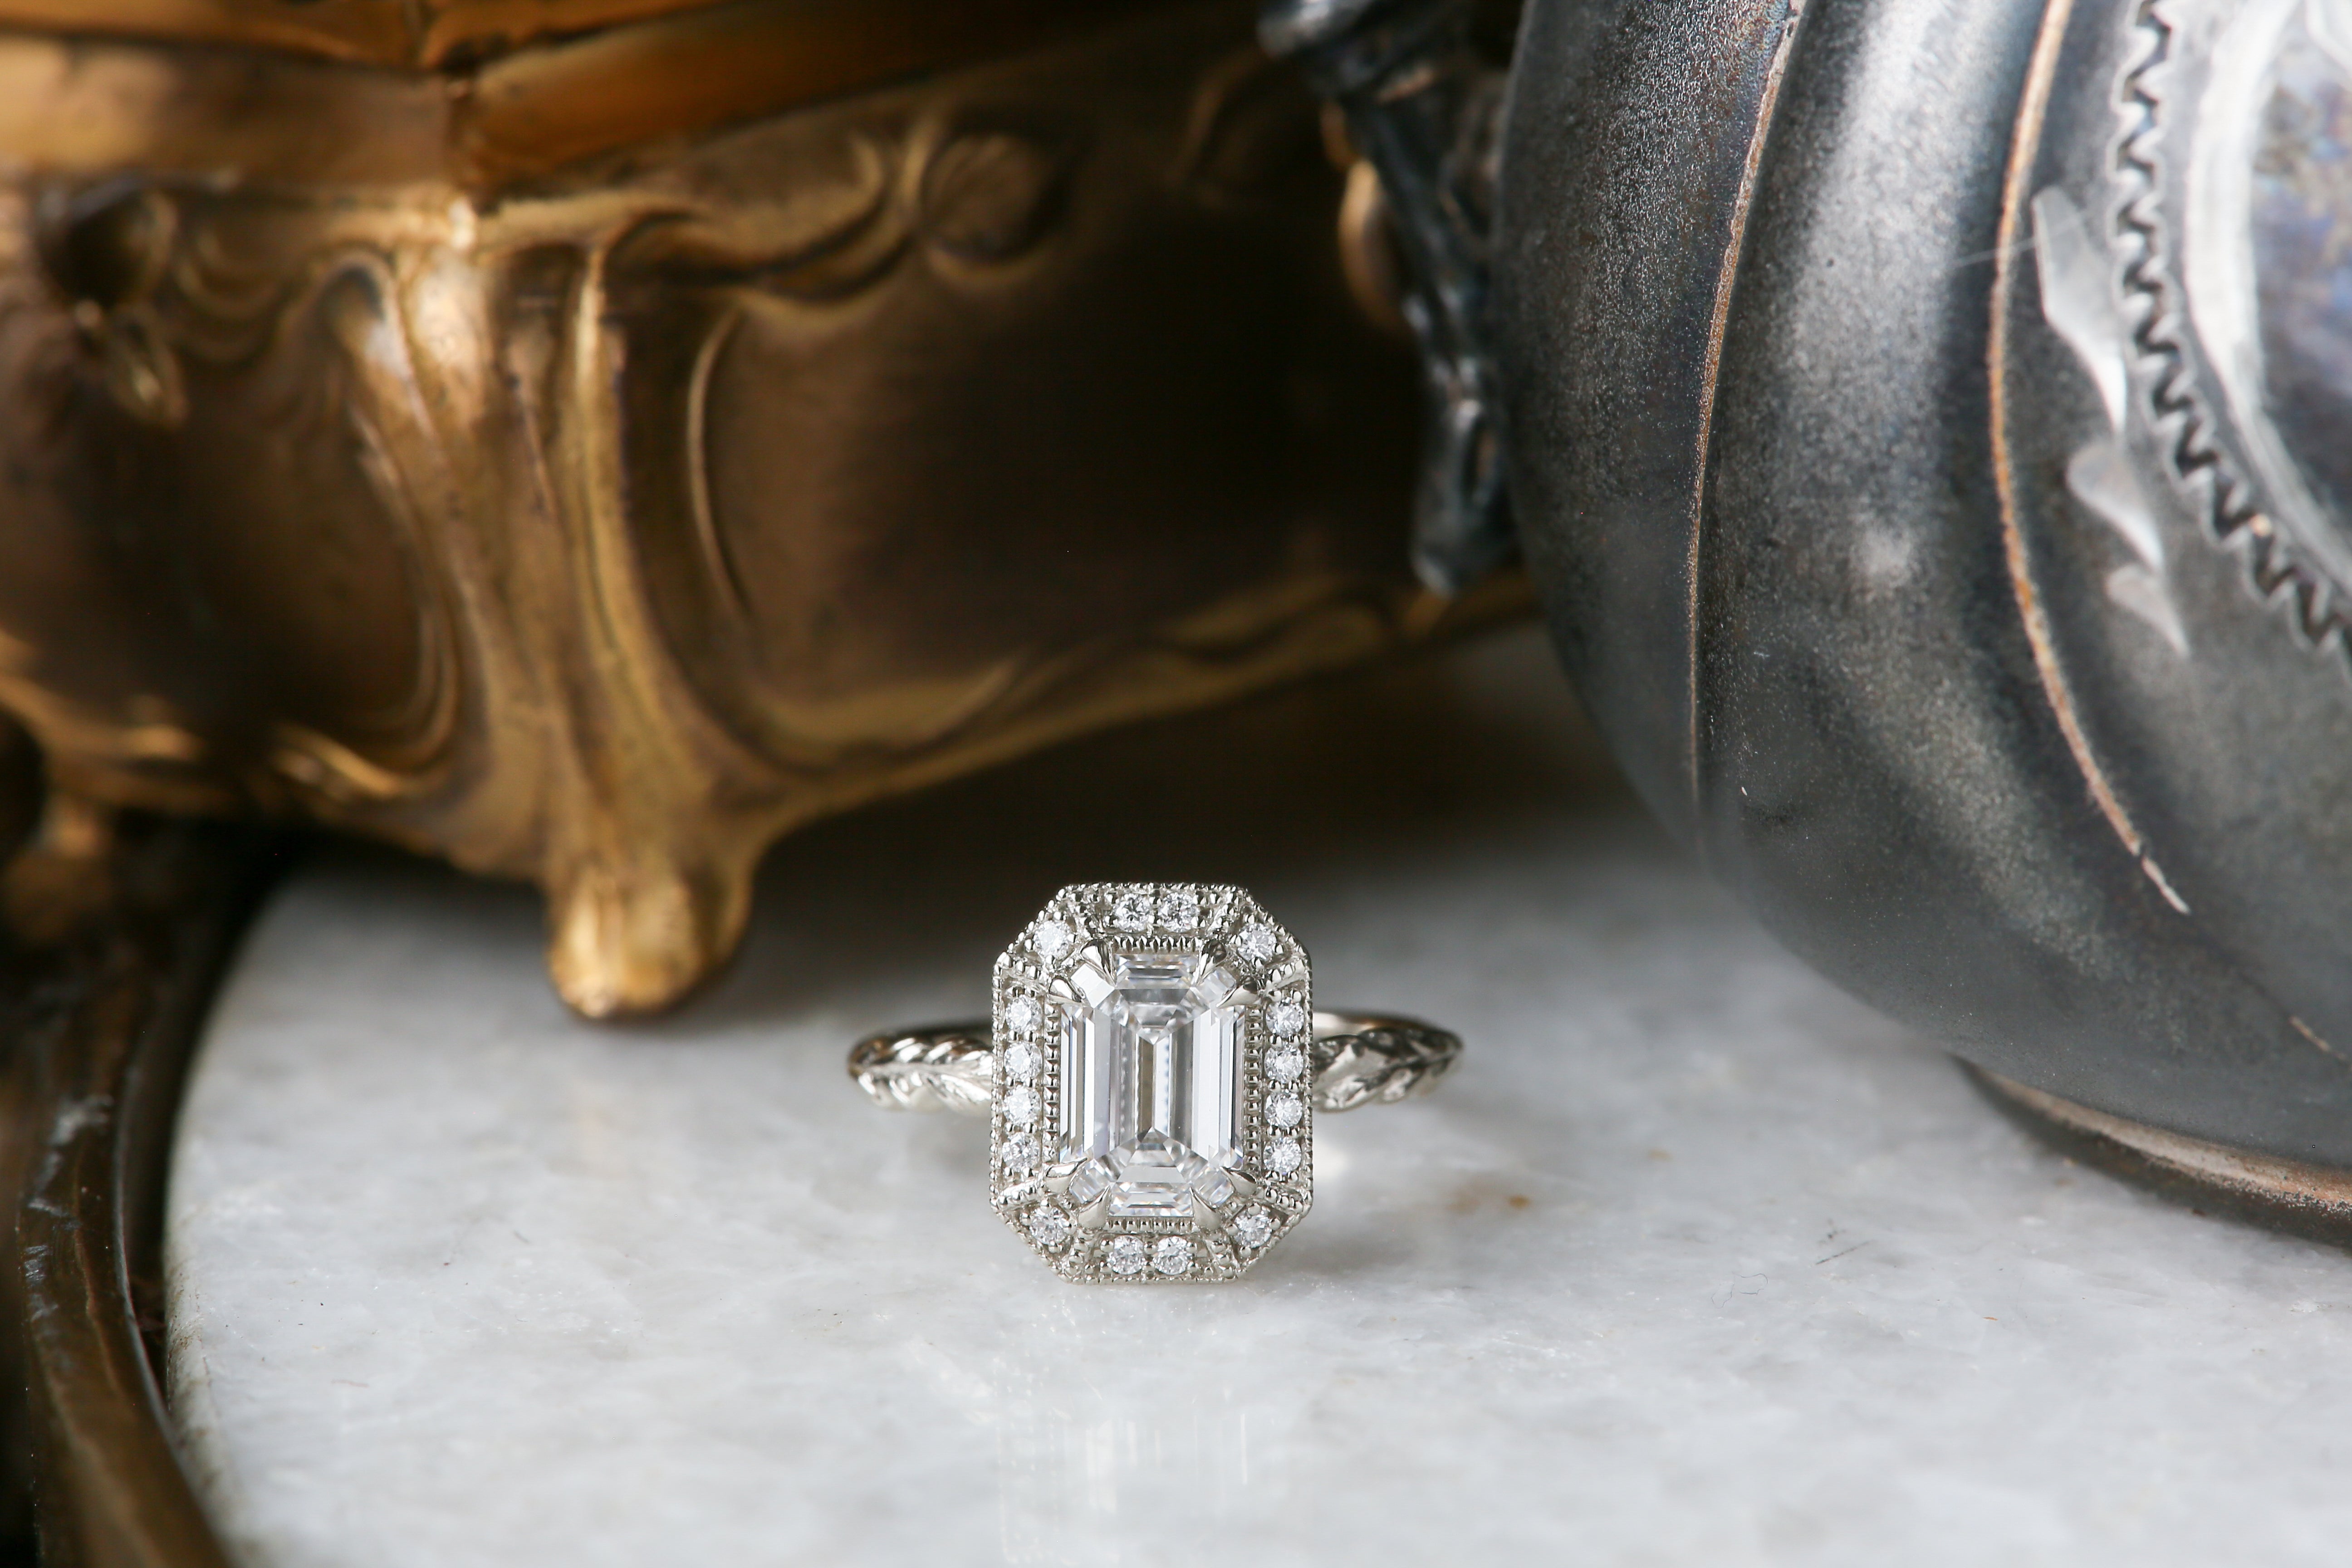 The Inverness Ring in Lab Grown Emerald Cut Diamond